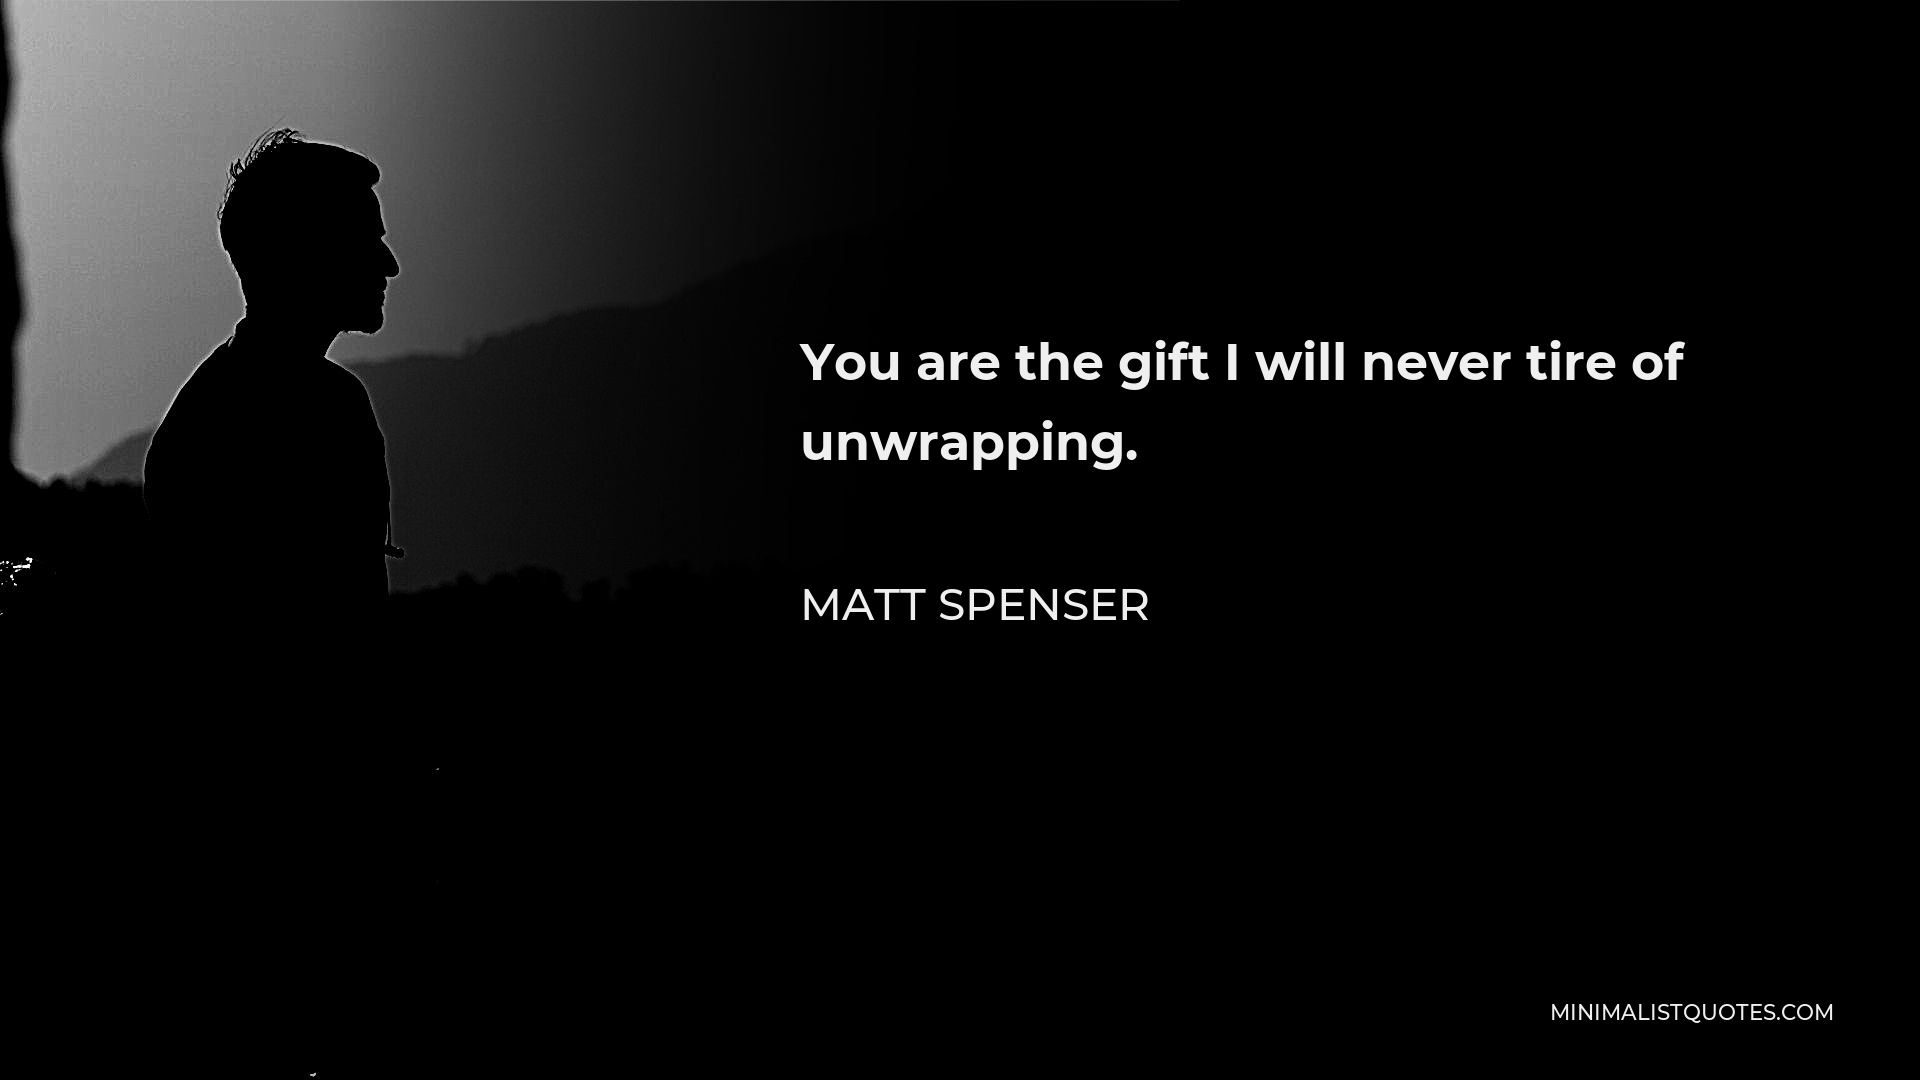 Matt Spenser Quote - You are the gift I will never tire of unwrapping.